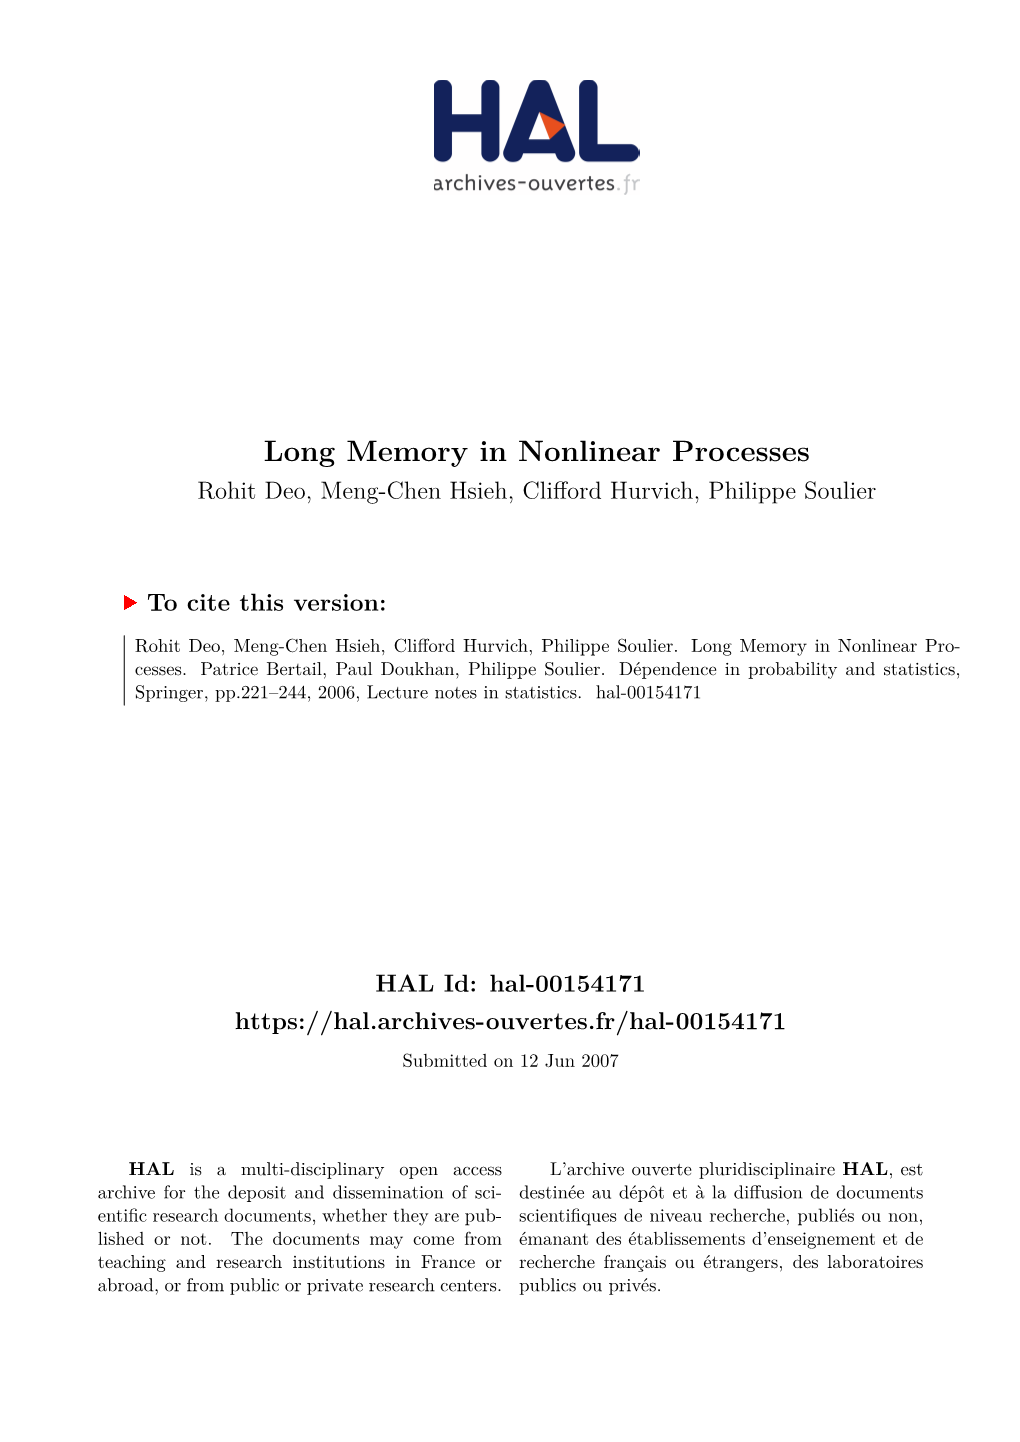 Long Memory in Nonlinear Processes Rohit Deo, Meng-Chen Hsieh, Clifford Hurvich, Philippe Soulier